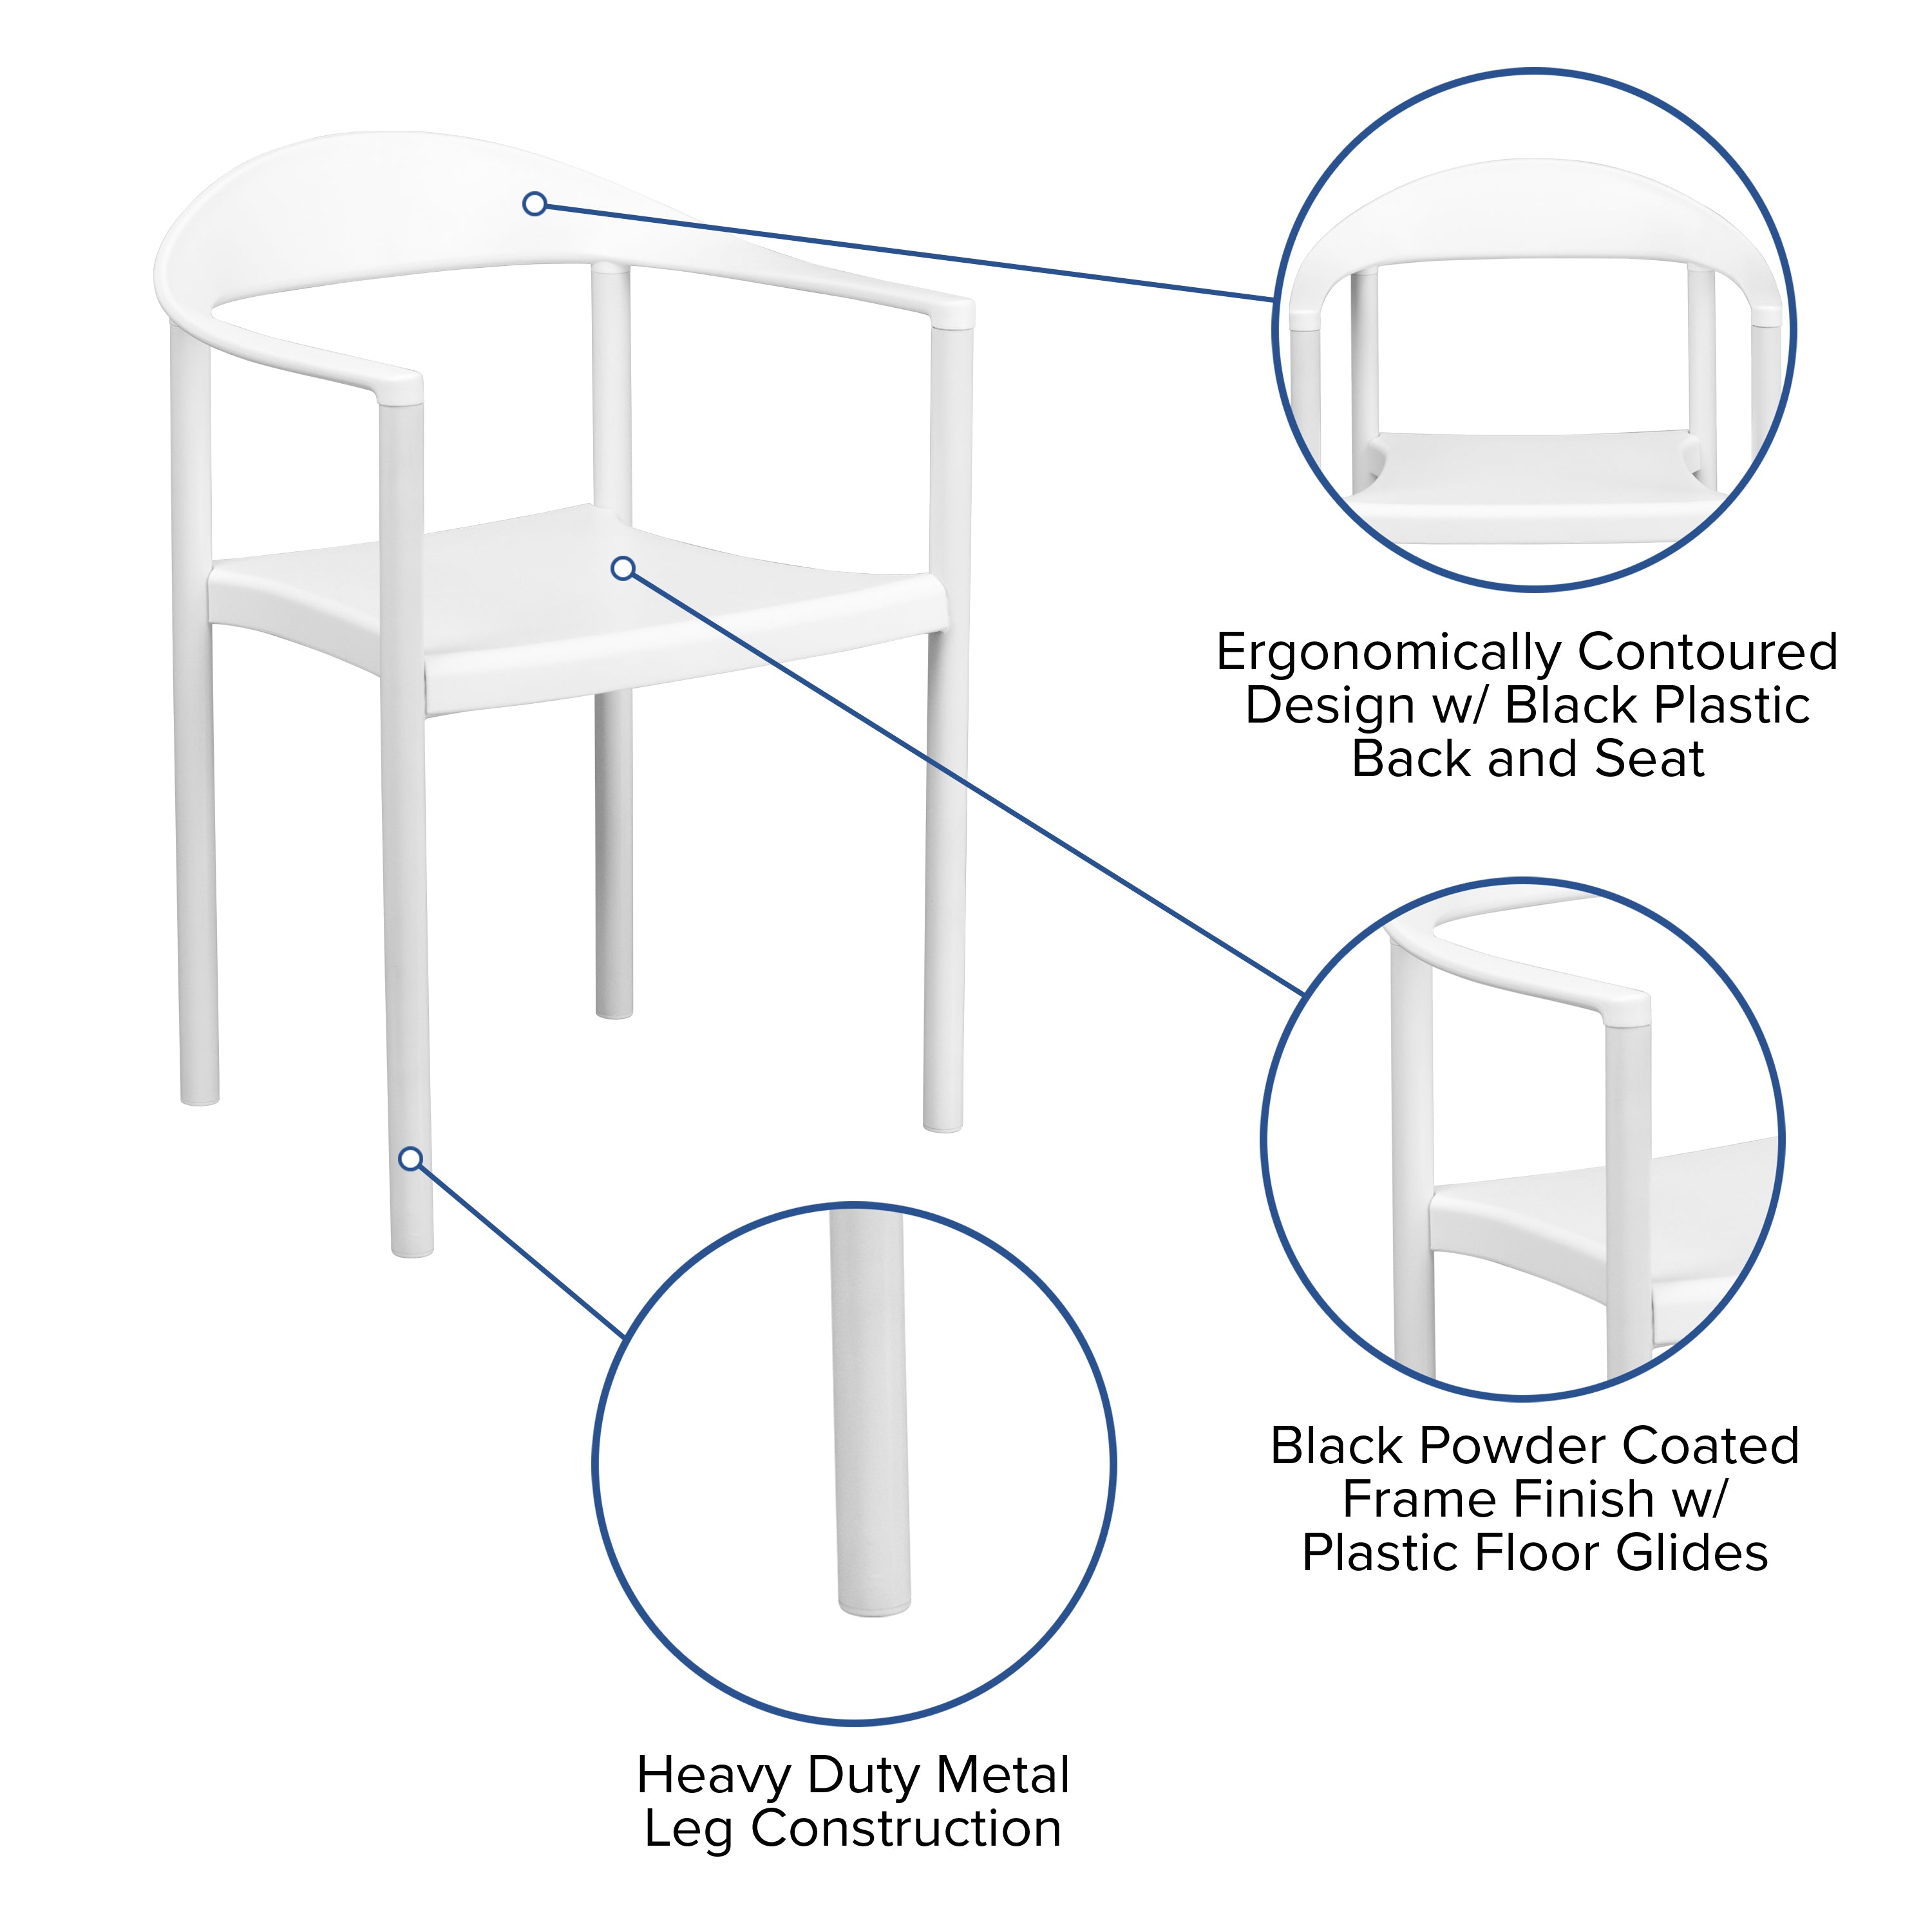 HERCULES Series 1000 lb. Capacity Plastic Cafe Stack Chair-Plastic Stack Chair-Flash Furniture-Wall2Wall Furnishings